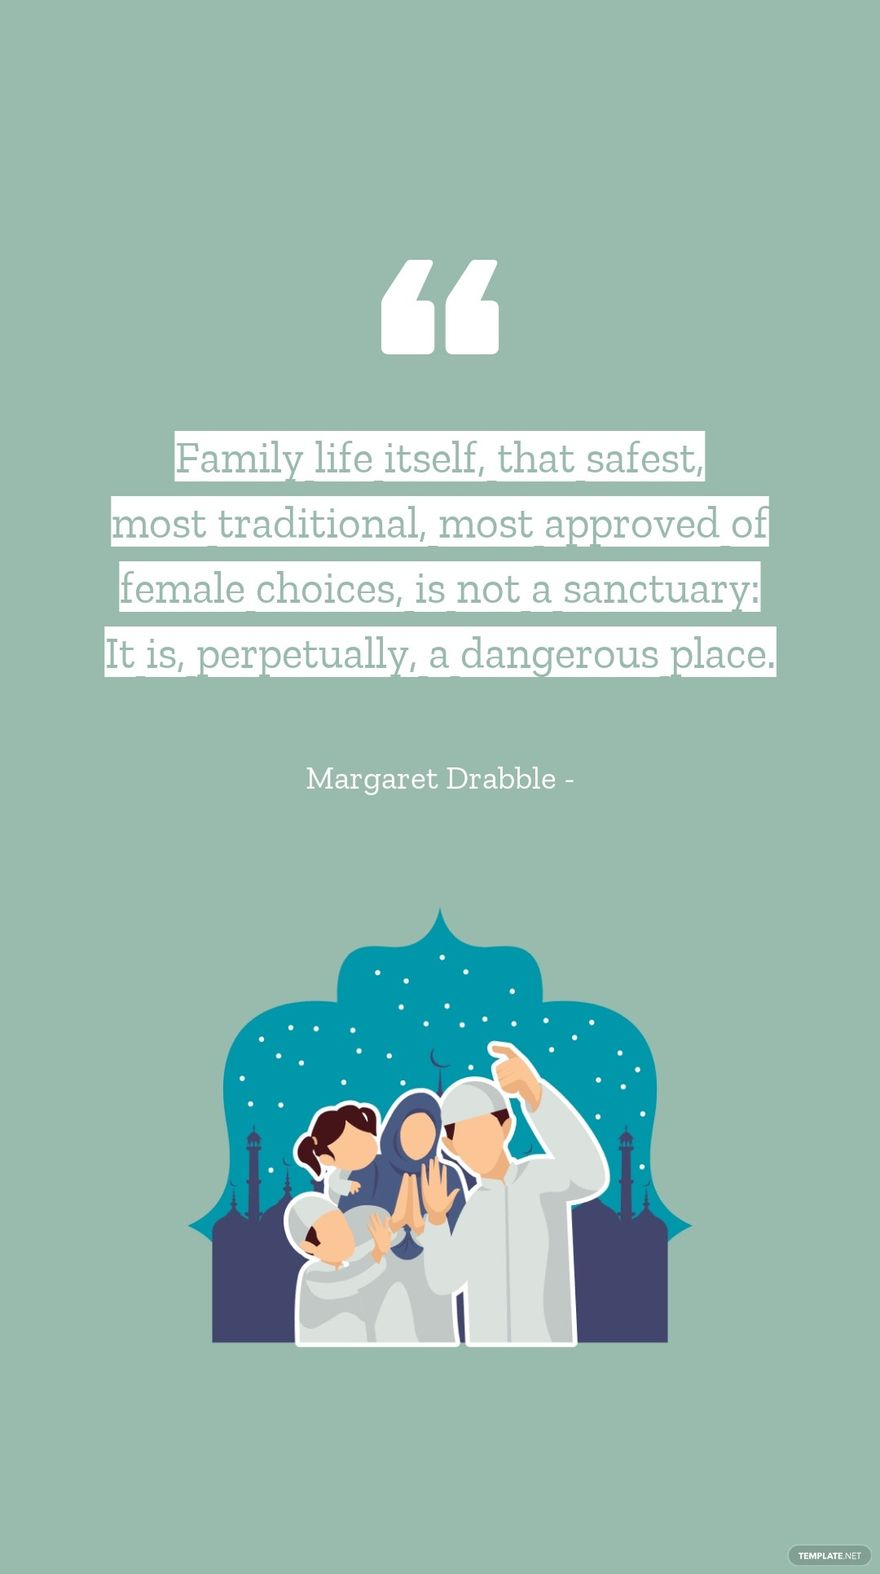 Margaret Drabble - Family life itself, that safest, most traditional, most approved of female choices, is not a sanctuary: It is, perpetually, a dangerous place.